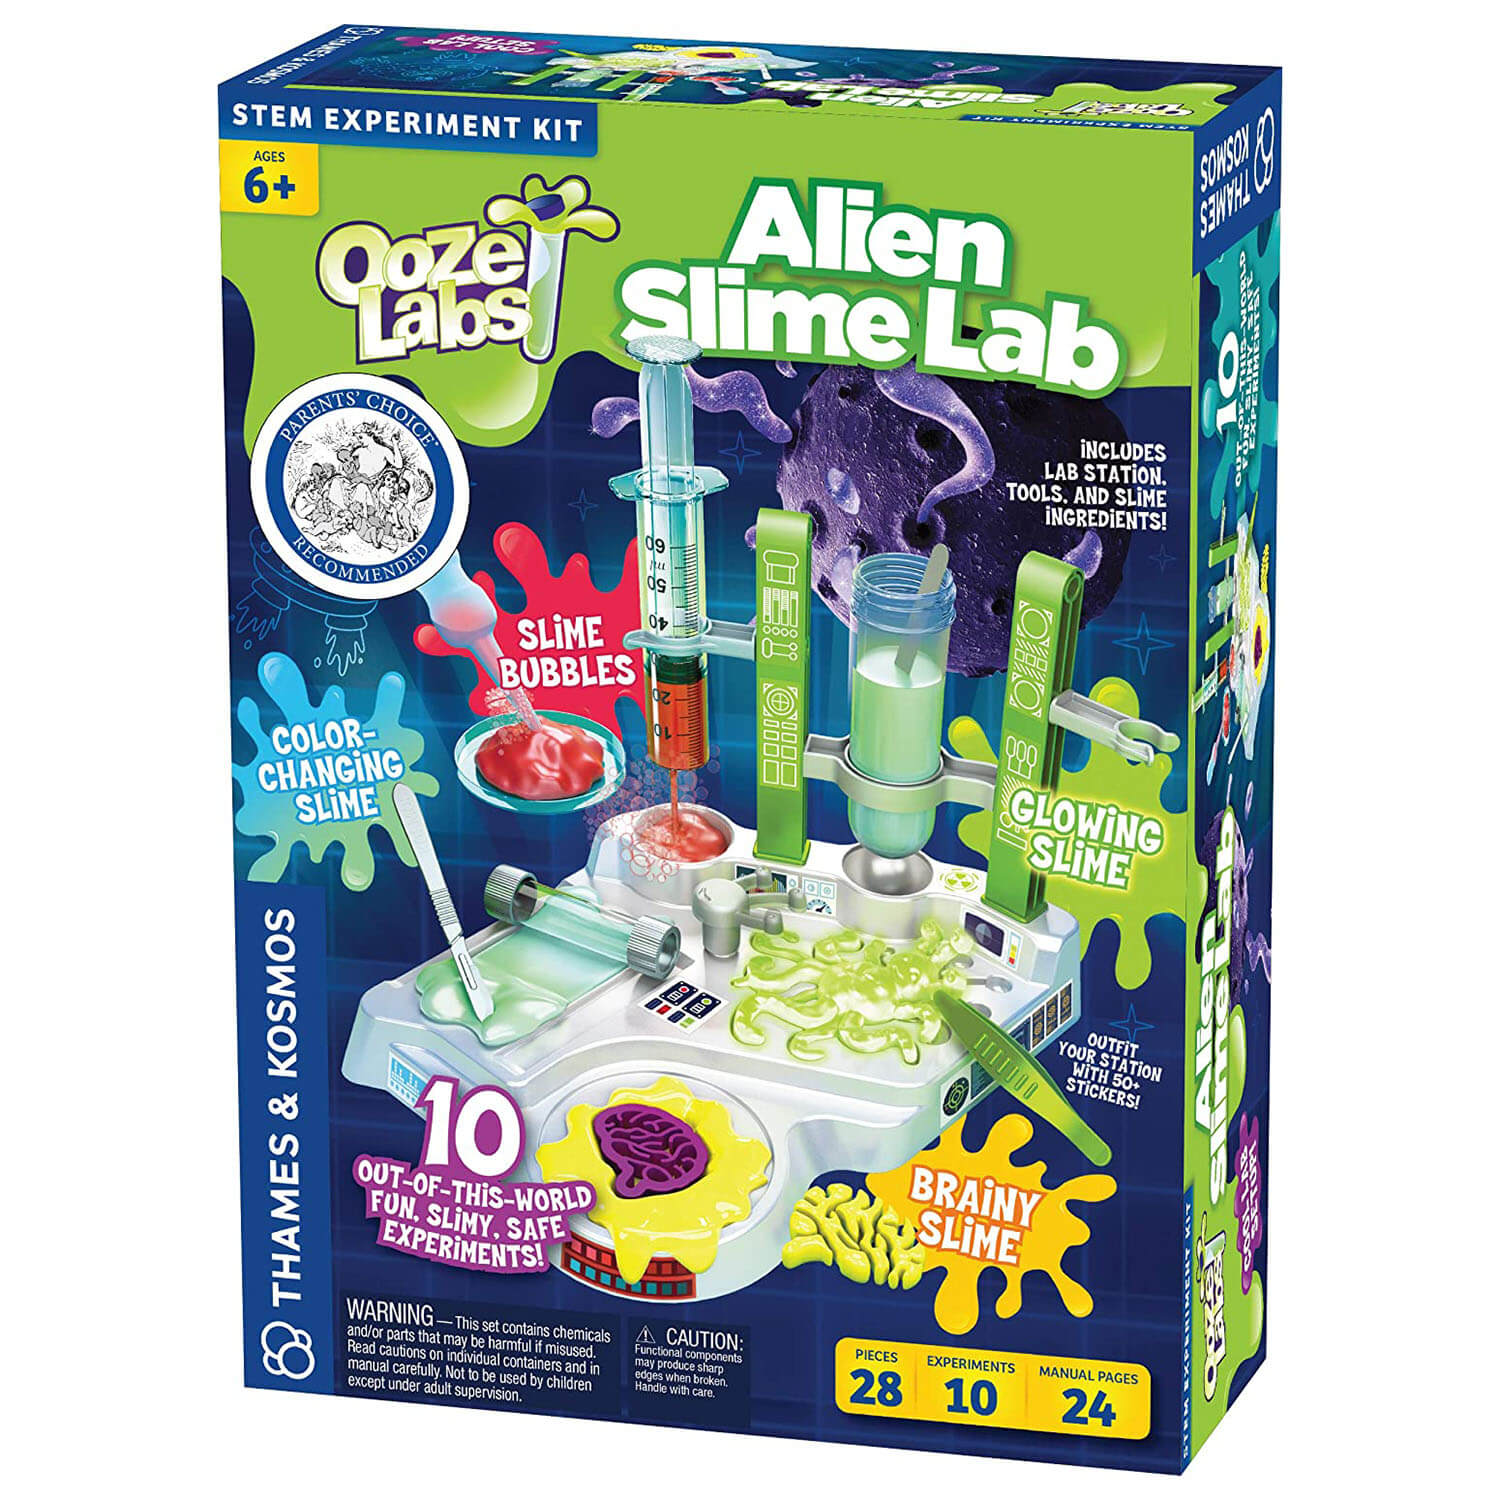 Thames and Kosmos Ooze Labs Alien Slime Lab Science Experiment Kit